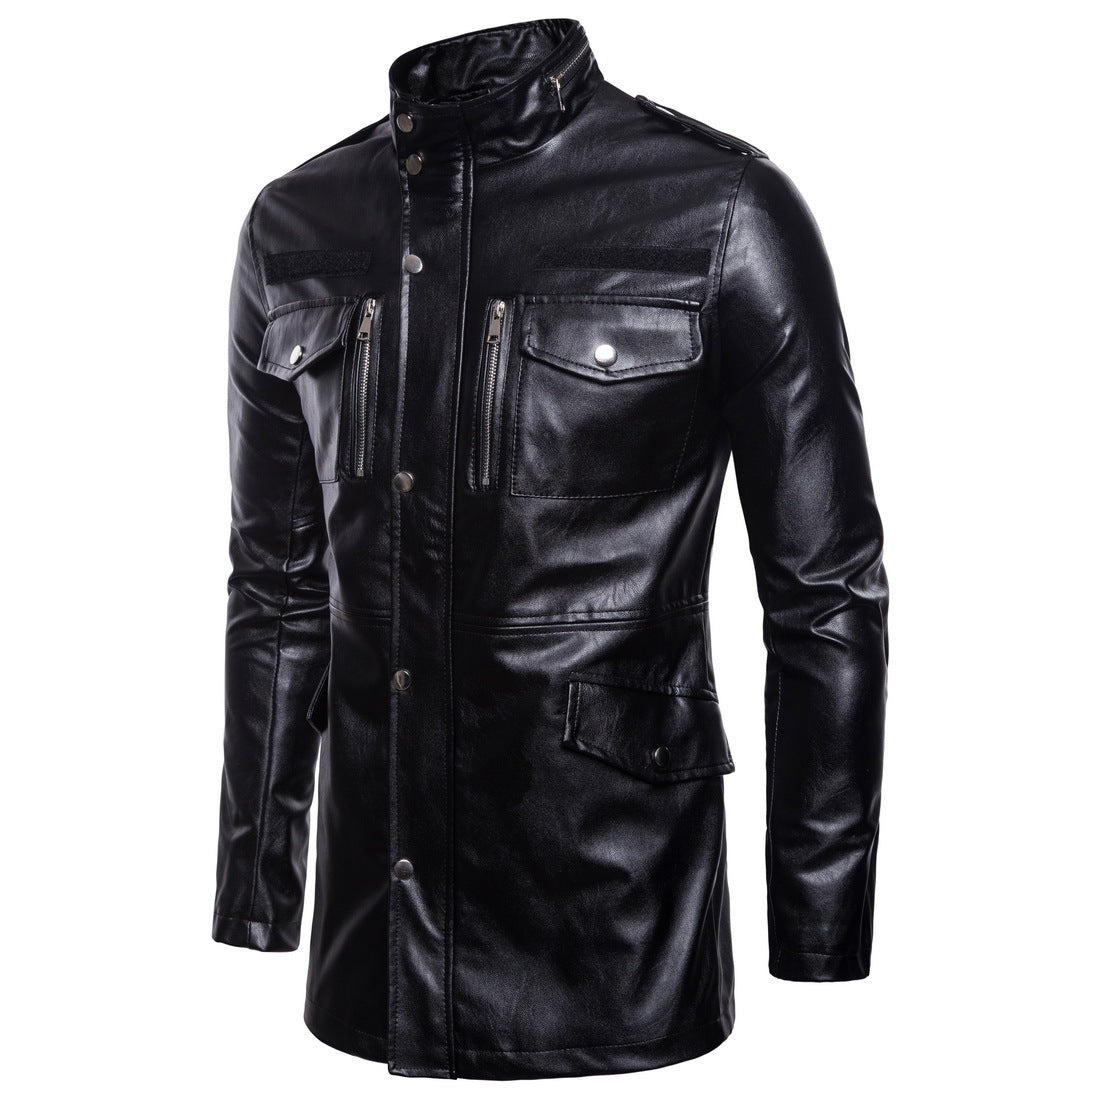 Stand collar four pocket motorcycle leather jacket